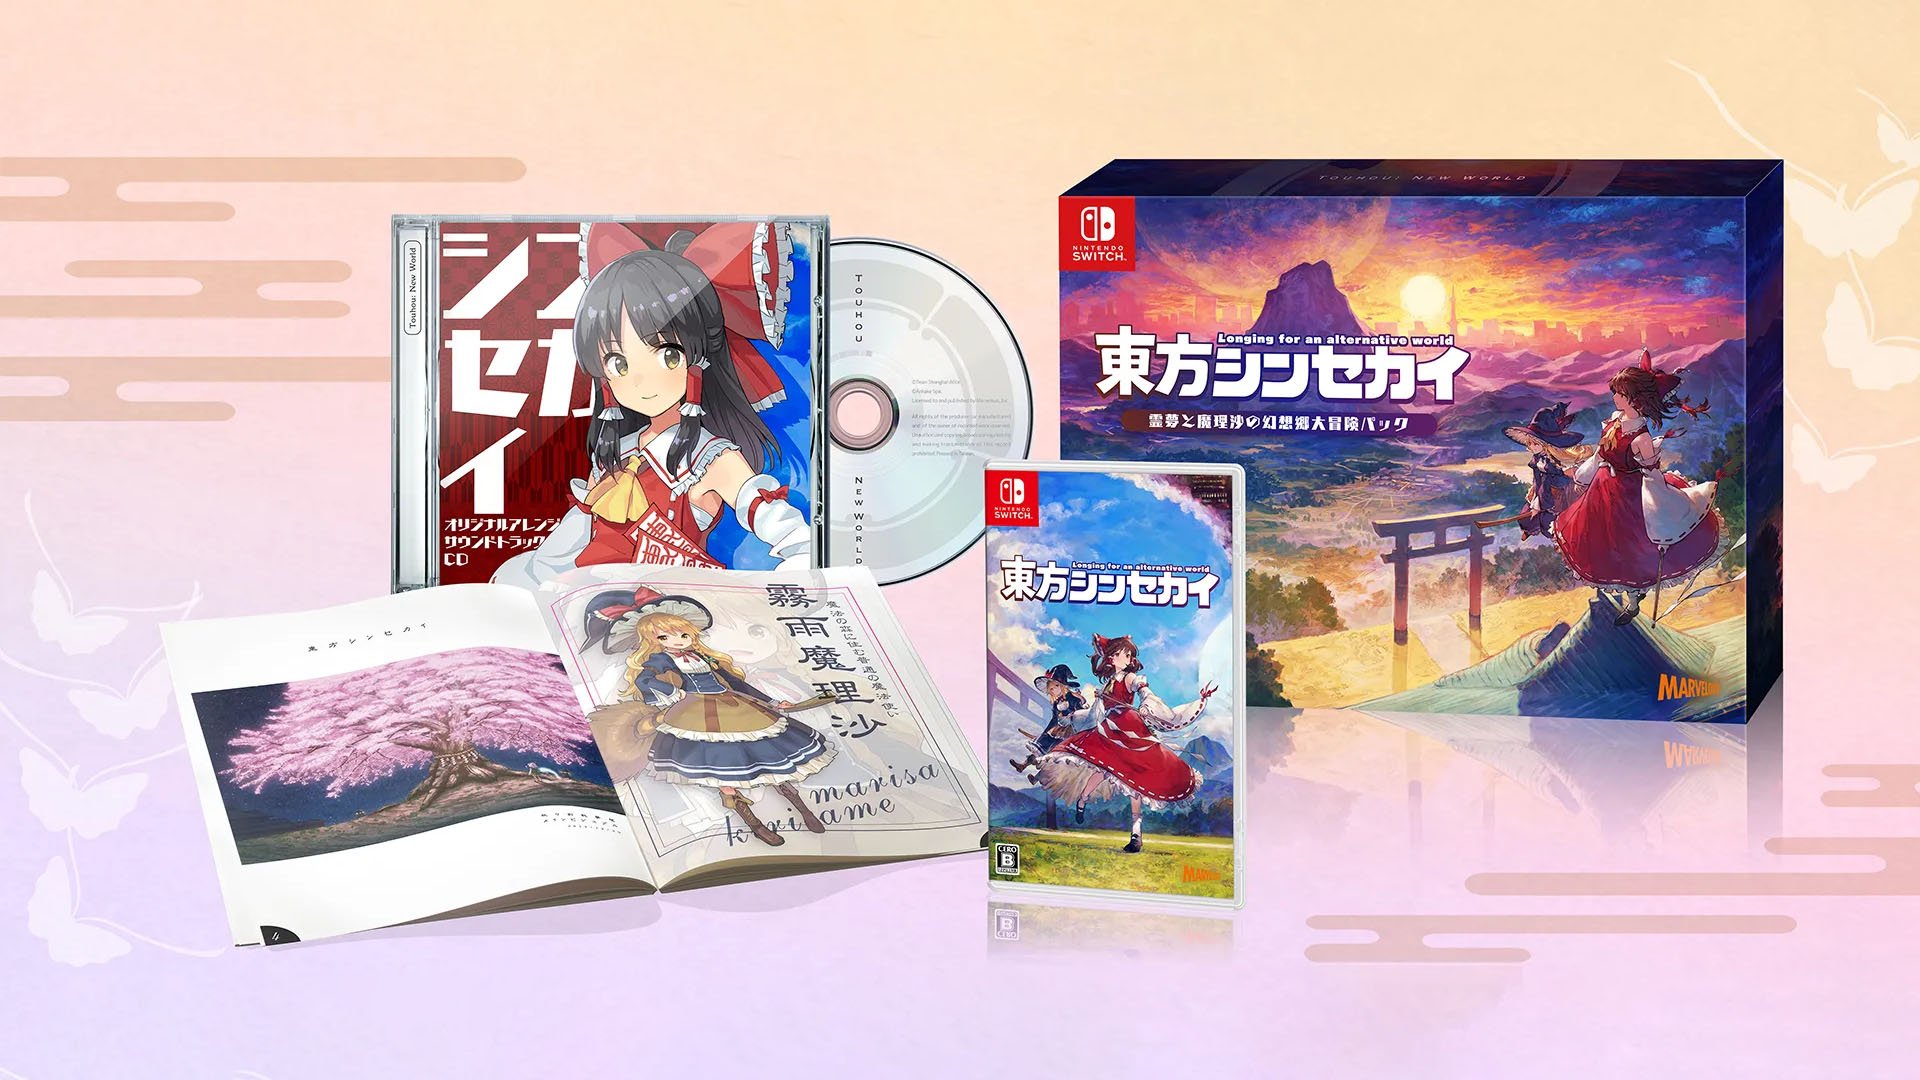 #
      Touhou Shinsekai: Longing for an alternative world launches July 13 for Switch in Japan, July 14 for PC, and later for PS5 and PS4